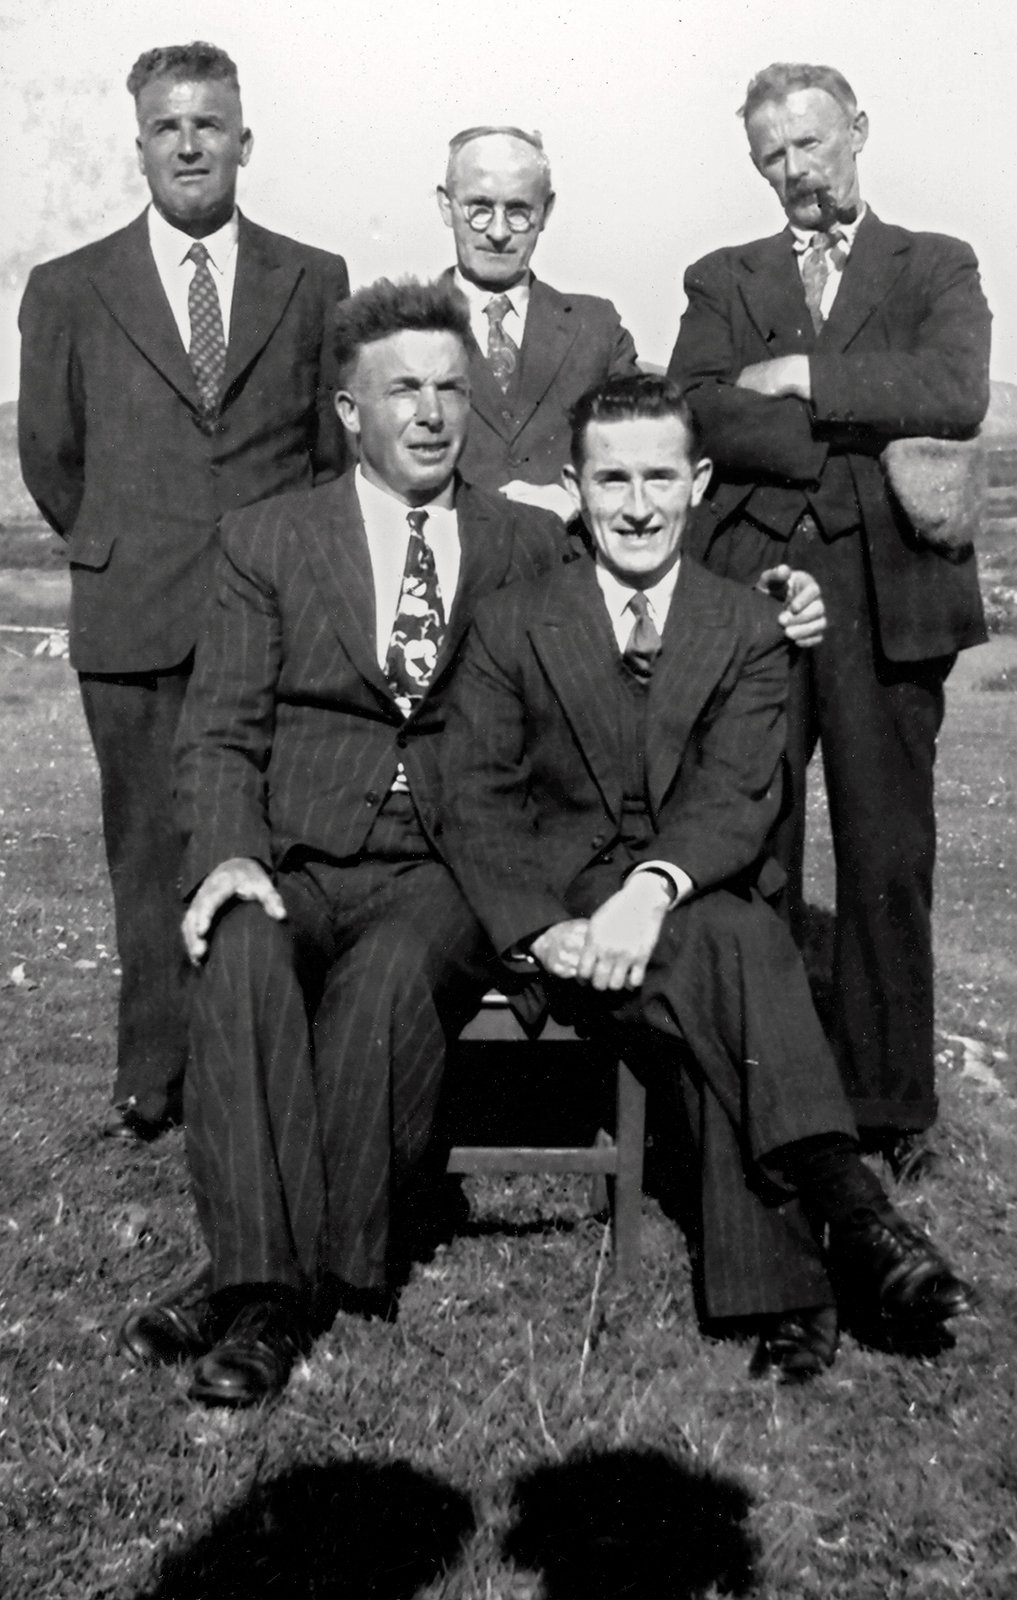 Mike Dwyer’s maternal uncles, Gerry O’Driscoll and Paddy O’Driscoll, with three friends, visiting from Skibbereen. Taken outside the O’Driscoll’s house in Eyeries, Beara, County Cork, late 1950s. 